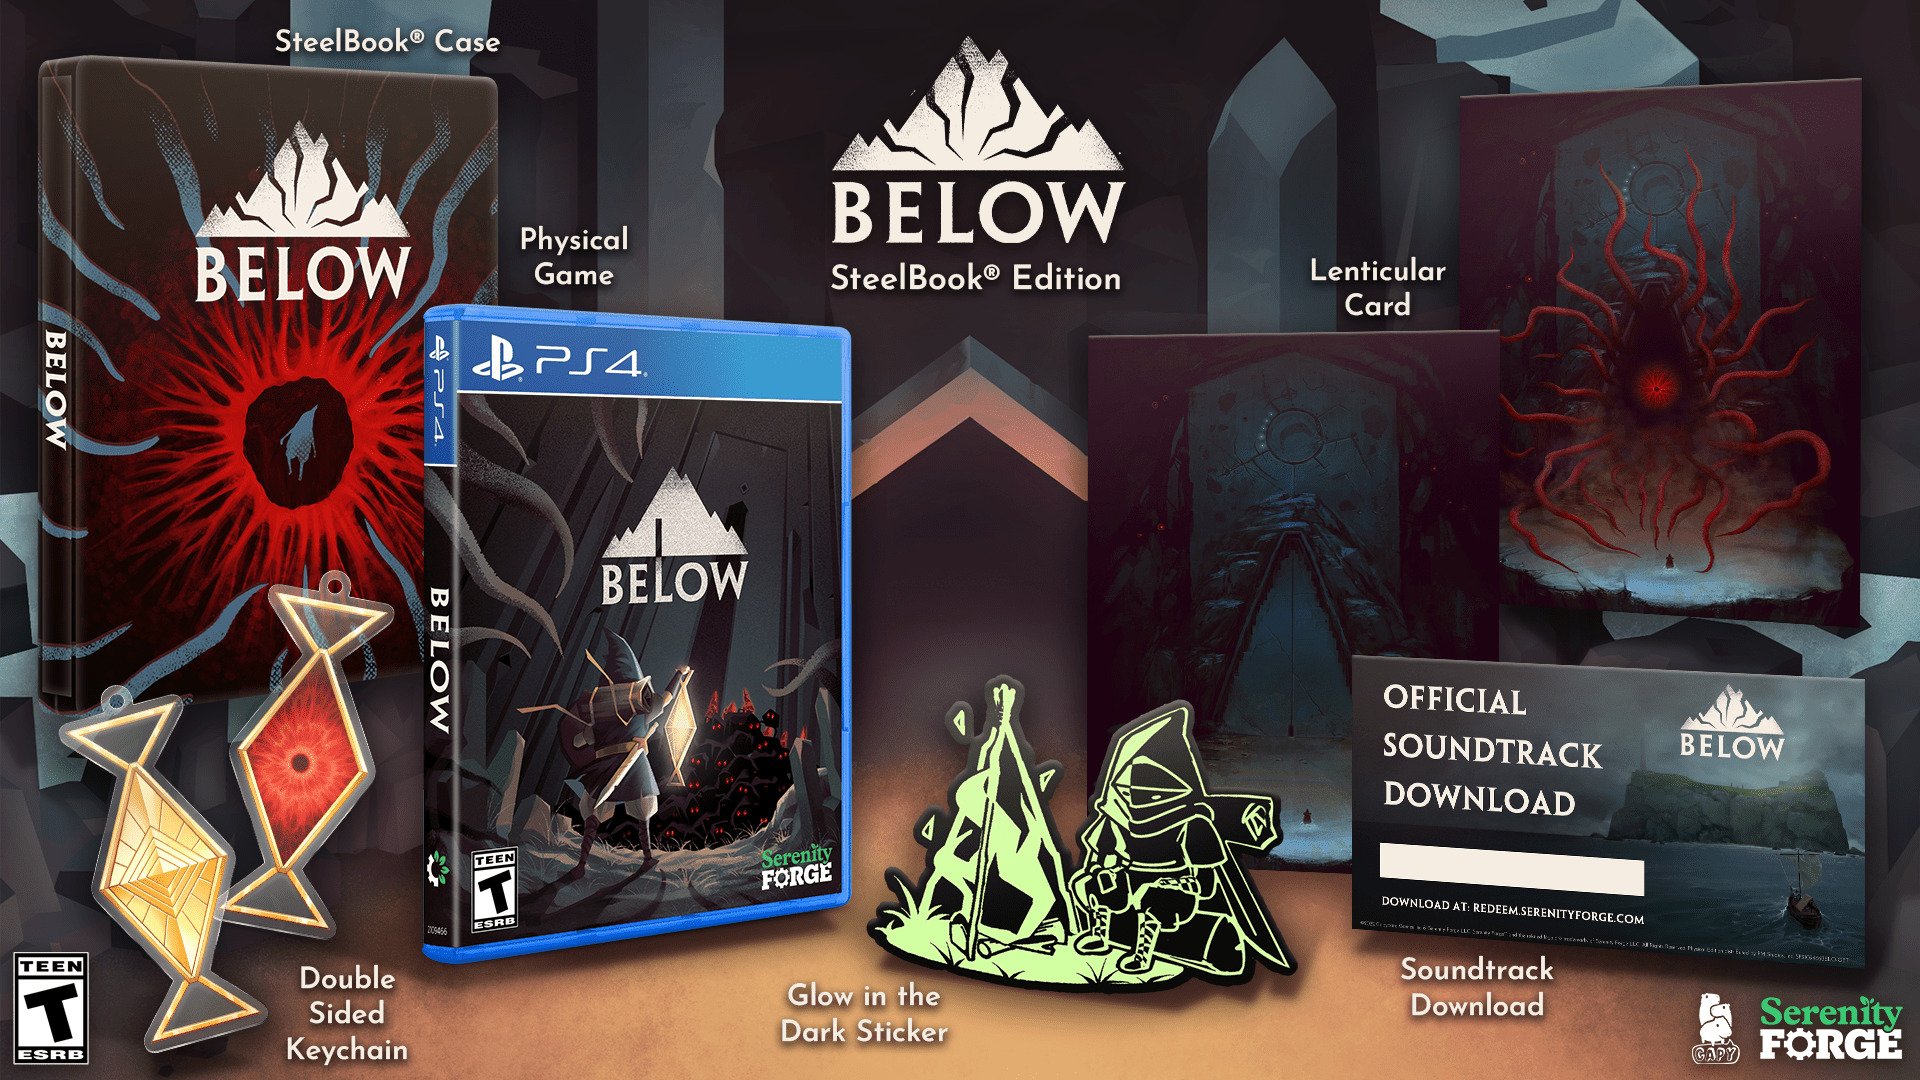 #
      BELOW SteelBook Edition for PS4 announced